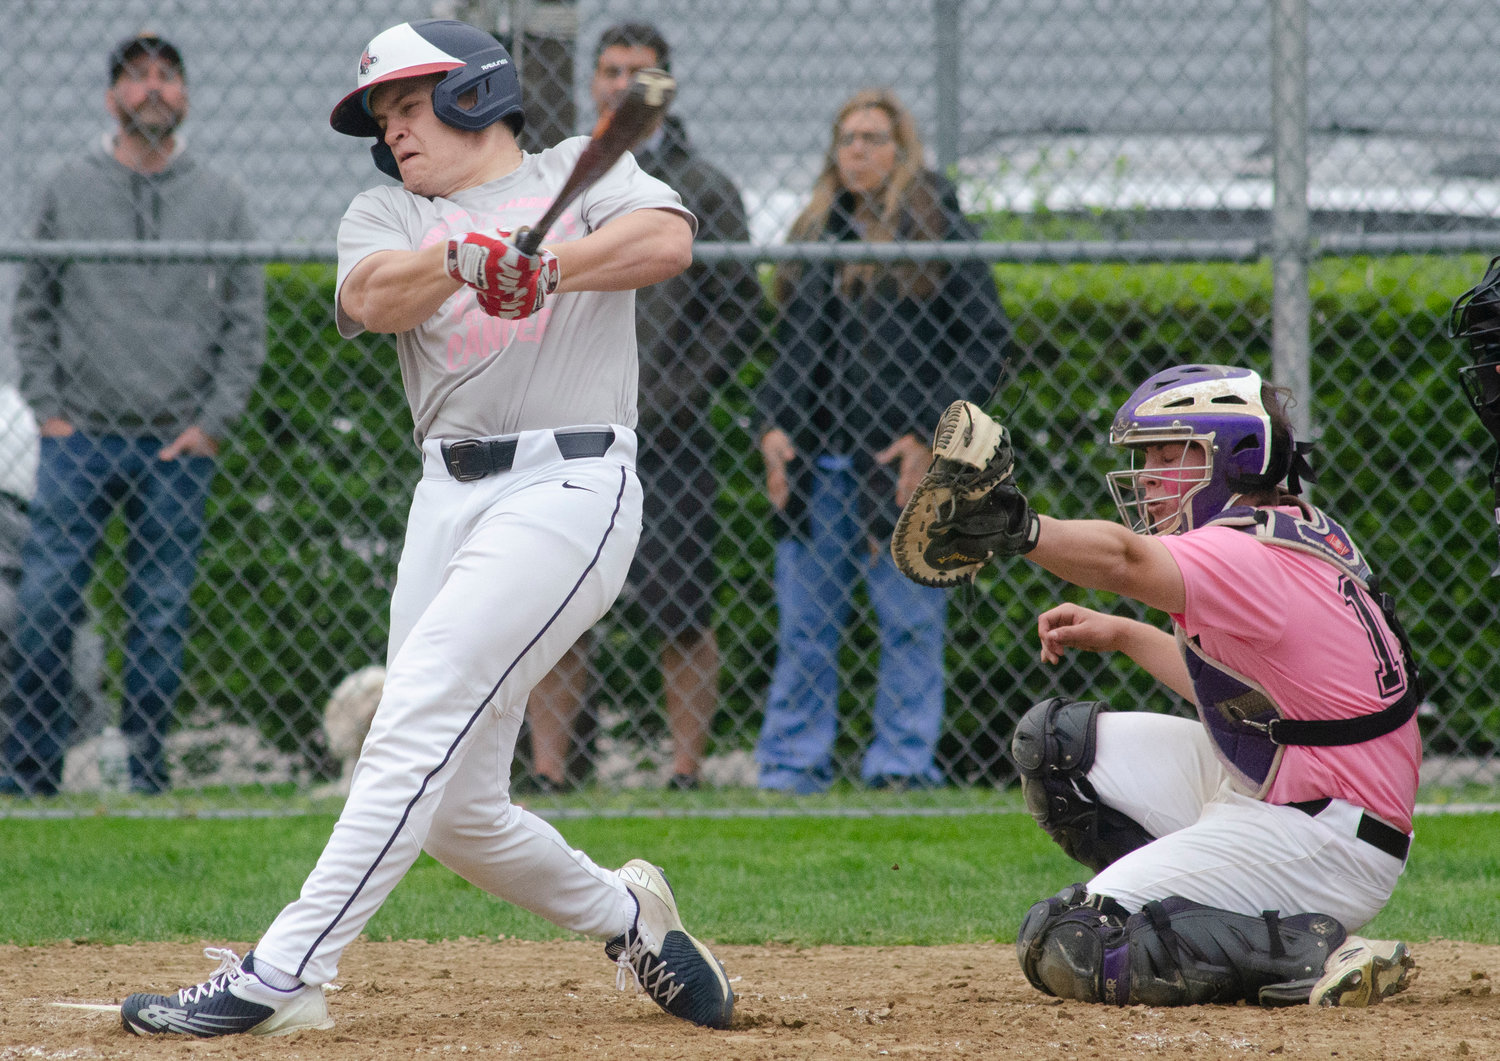 Barrington High School’s Harry Turner hits a long foul ball during the game against Mt. Hope on Friday.